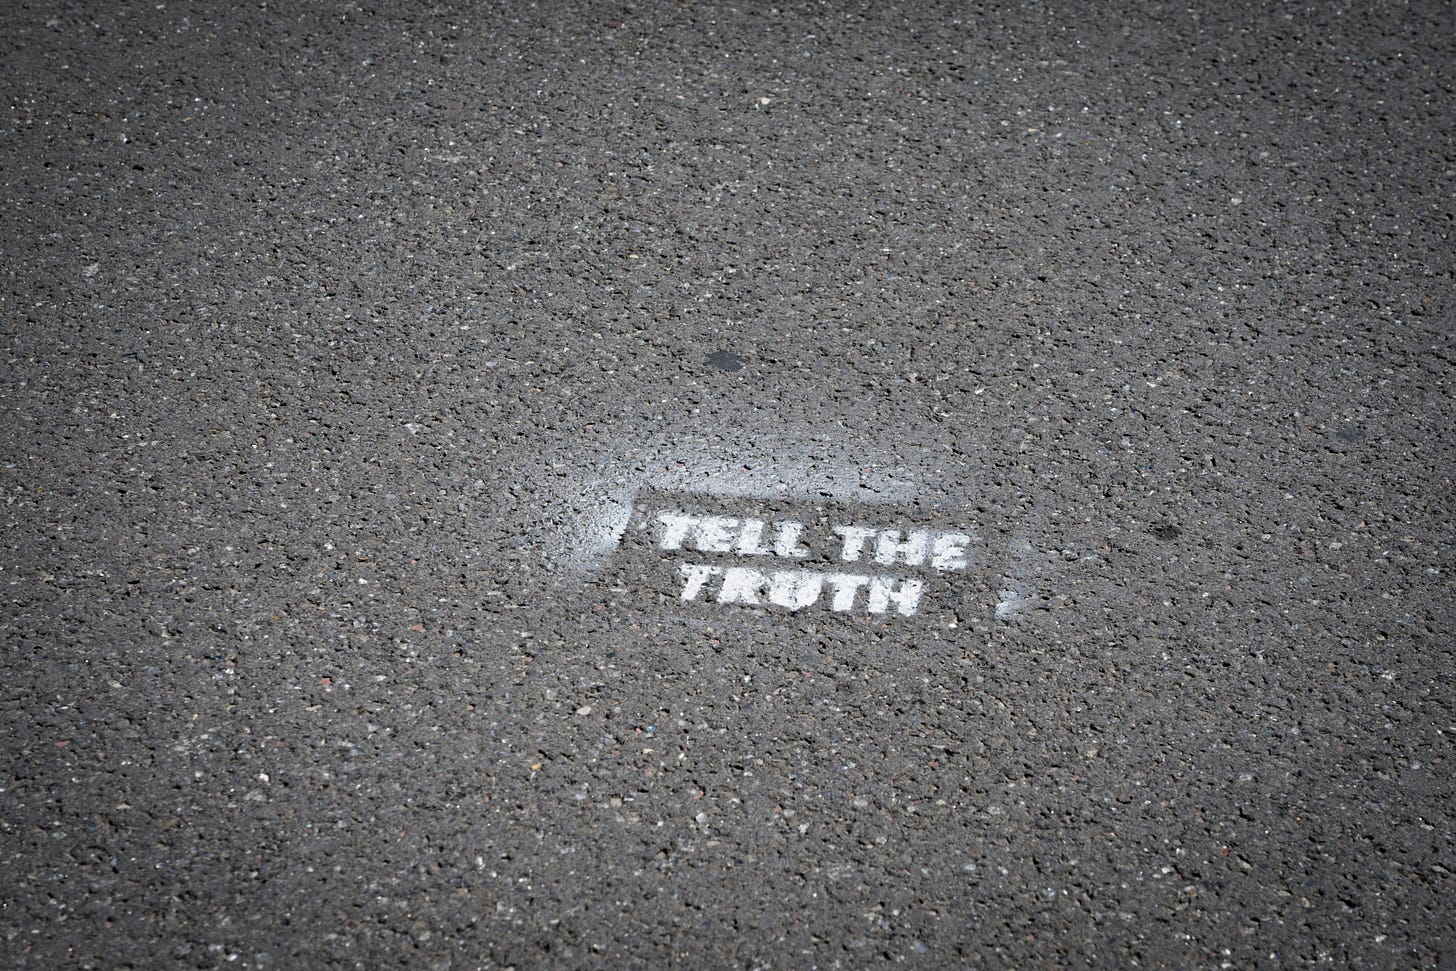 A grey concrete road with white stencilled graffiti that says 'tell the truth'